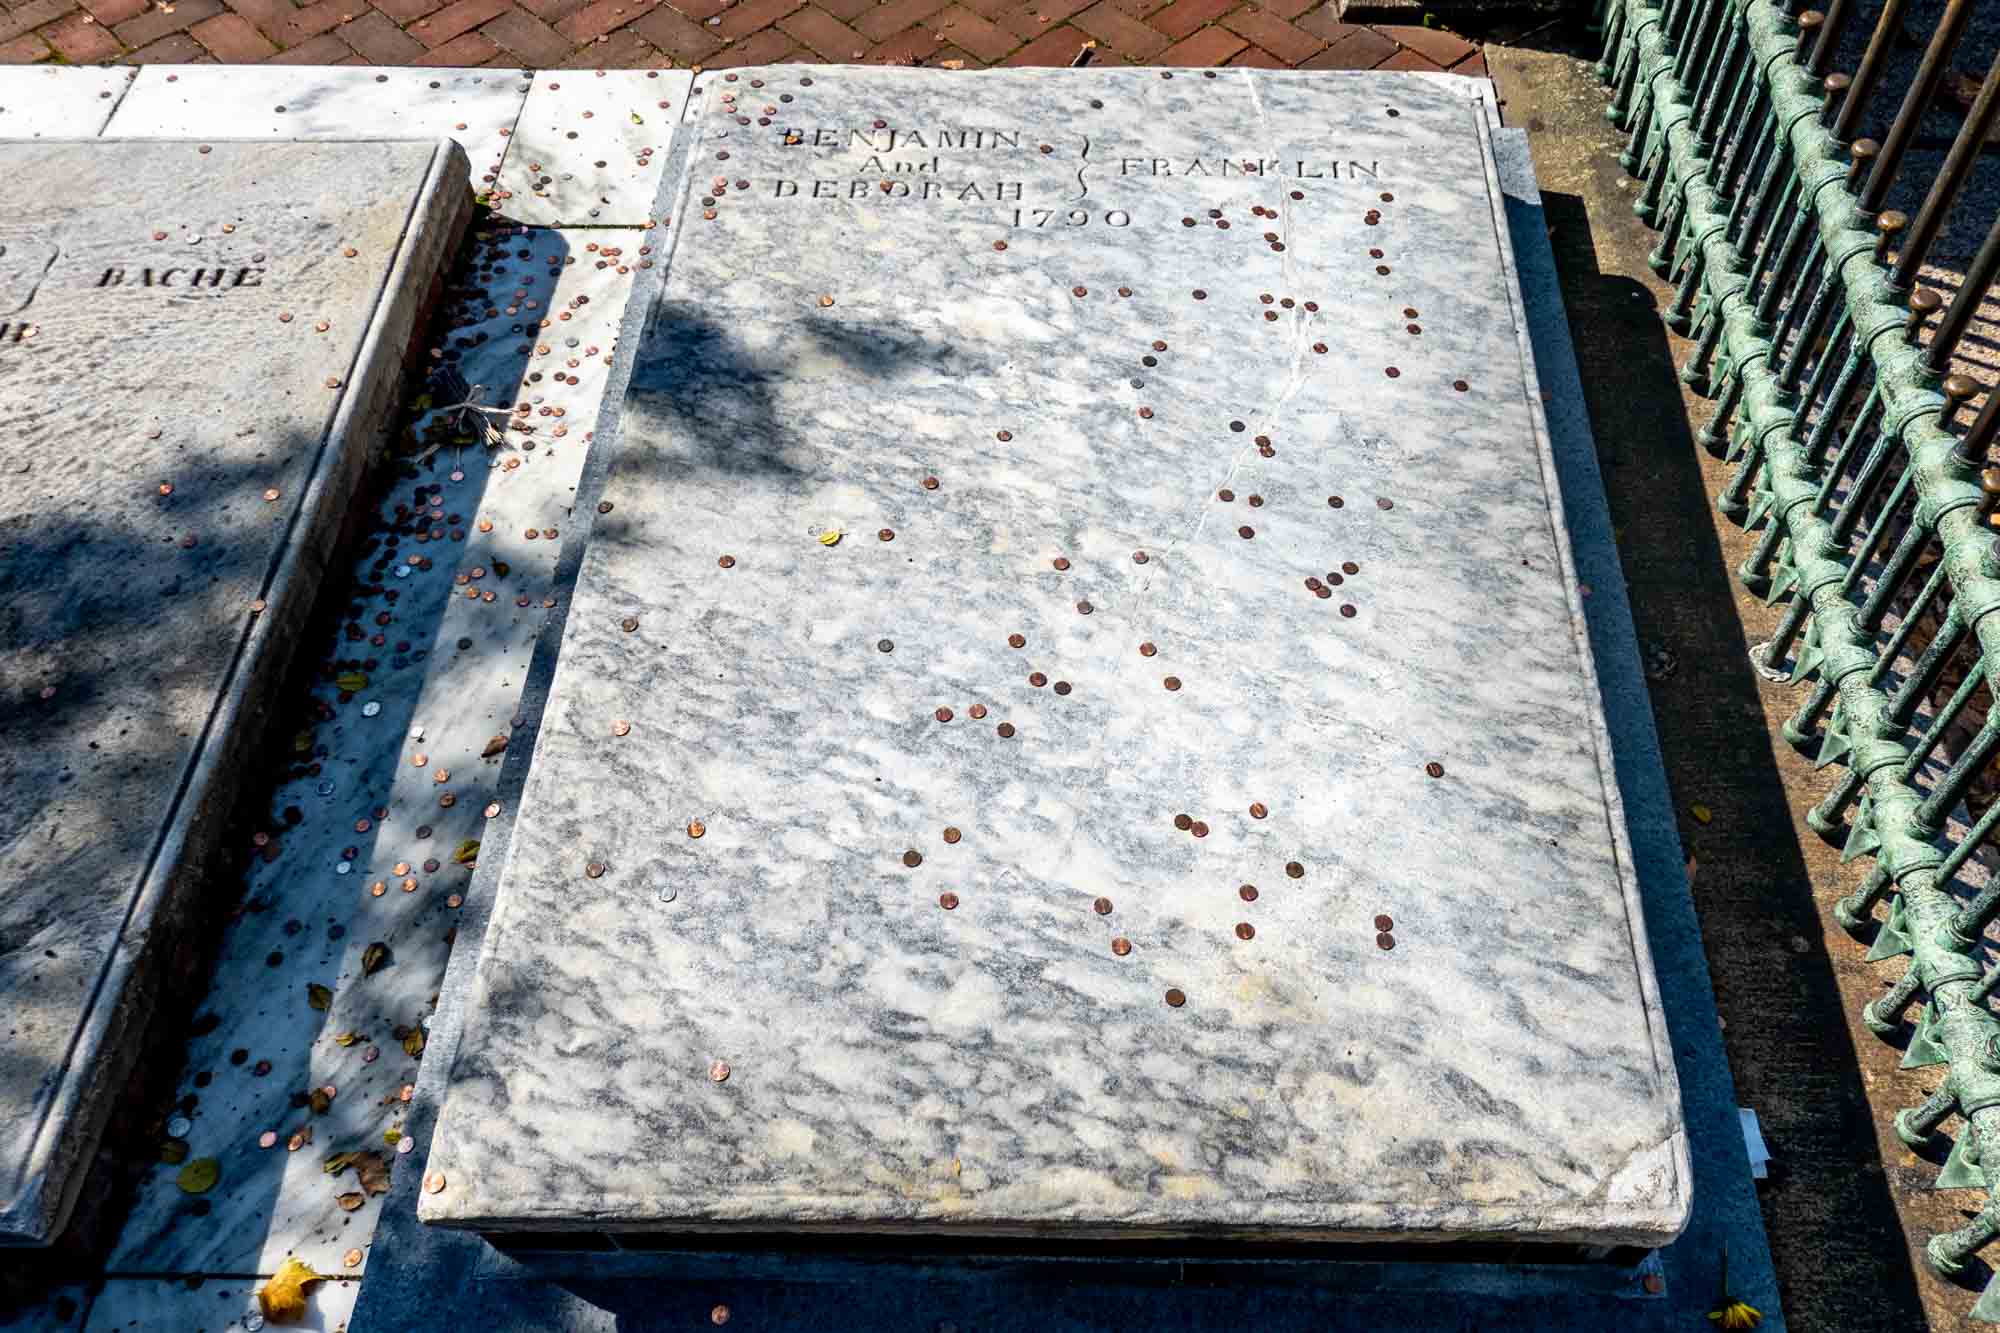 Marble slab grave marker inscribed with "Benjamin and Deborah Franklin, 1790" and covered with dozens of pennies